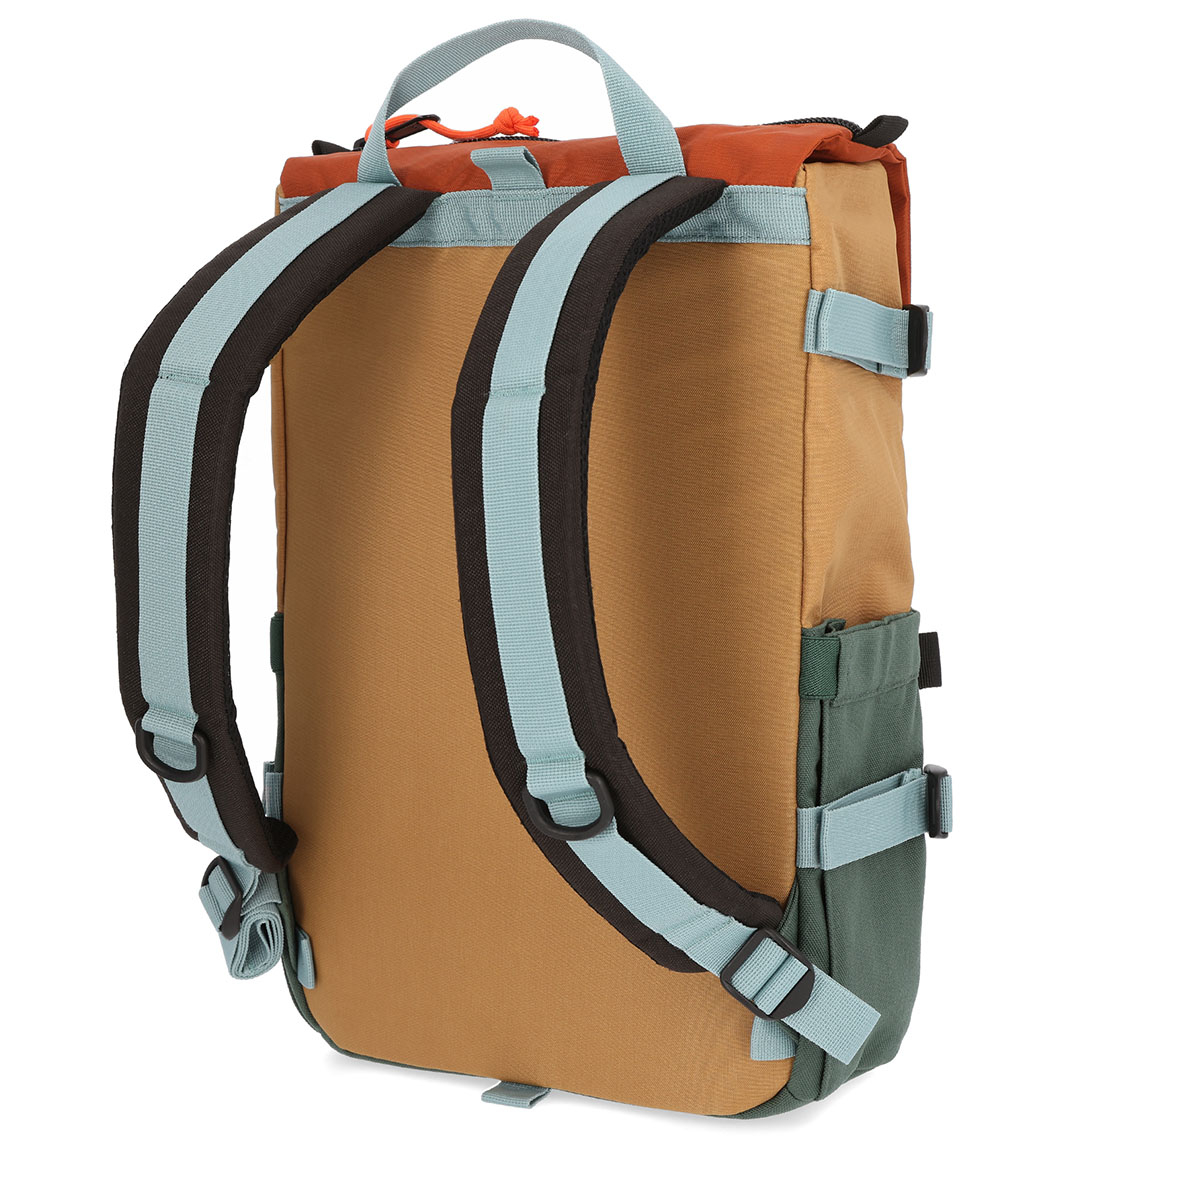 Topo Designs Rover Pack Classic Forest/Khaki, durable, lightweight and water-resistant pack for daily use